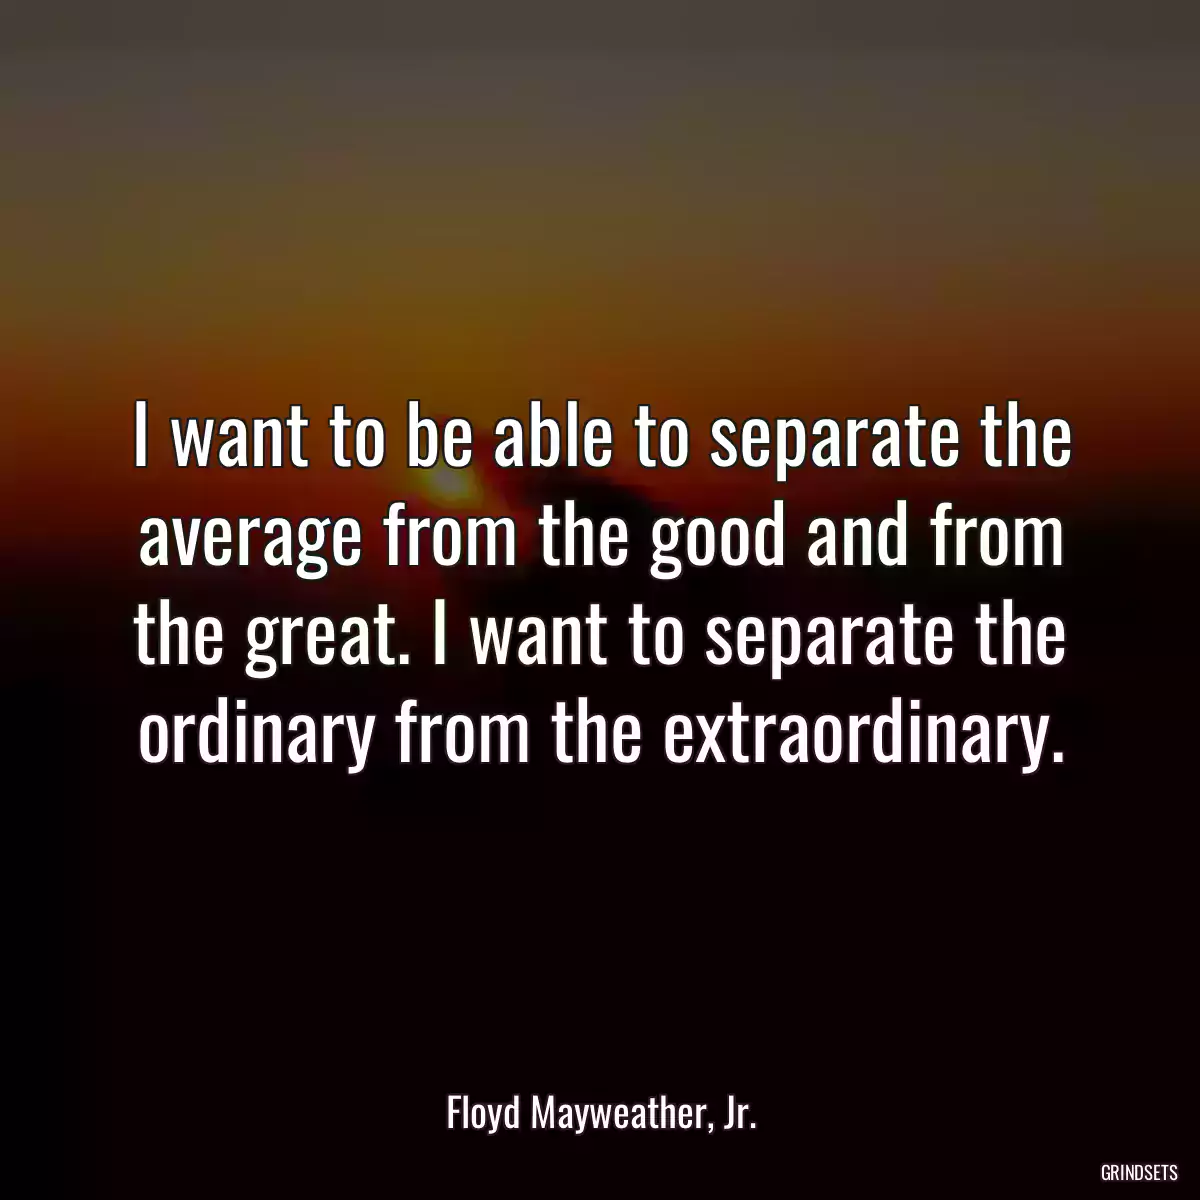 I want to be able to separate the average from the good and from the great. I want to separate the ordinary from the extraordinary.